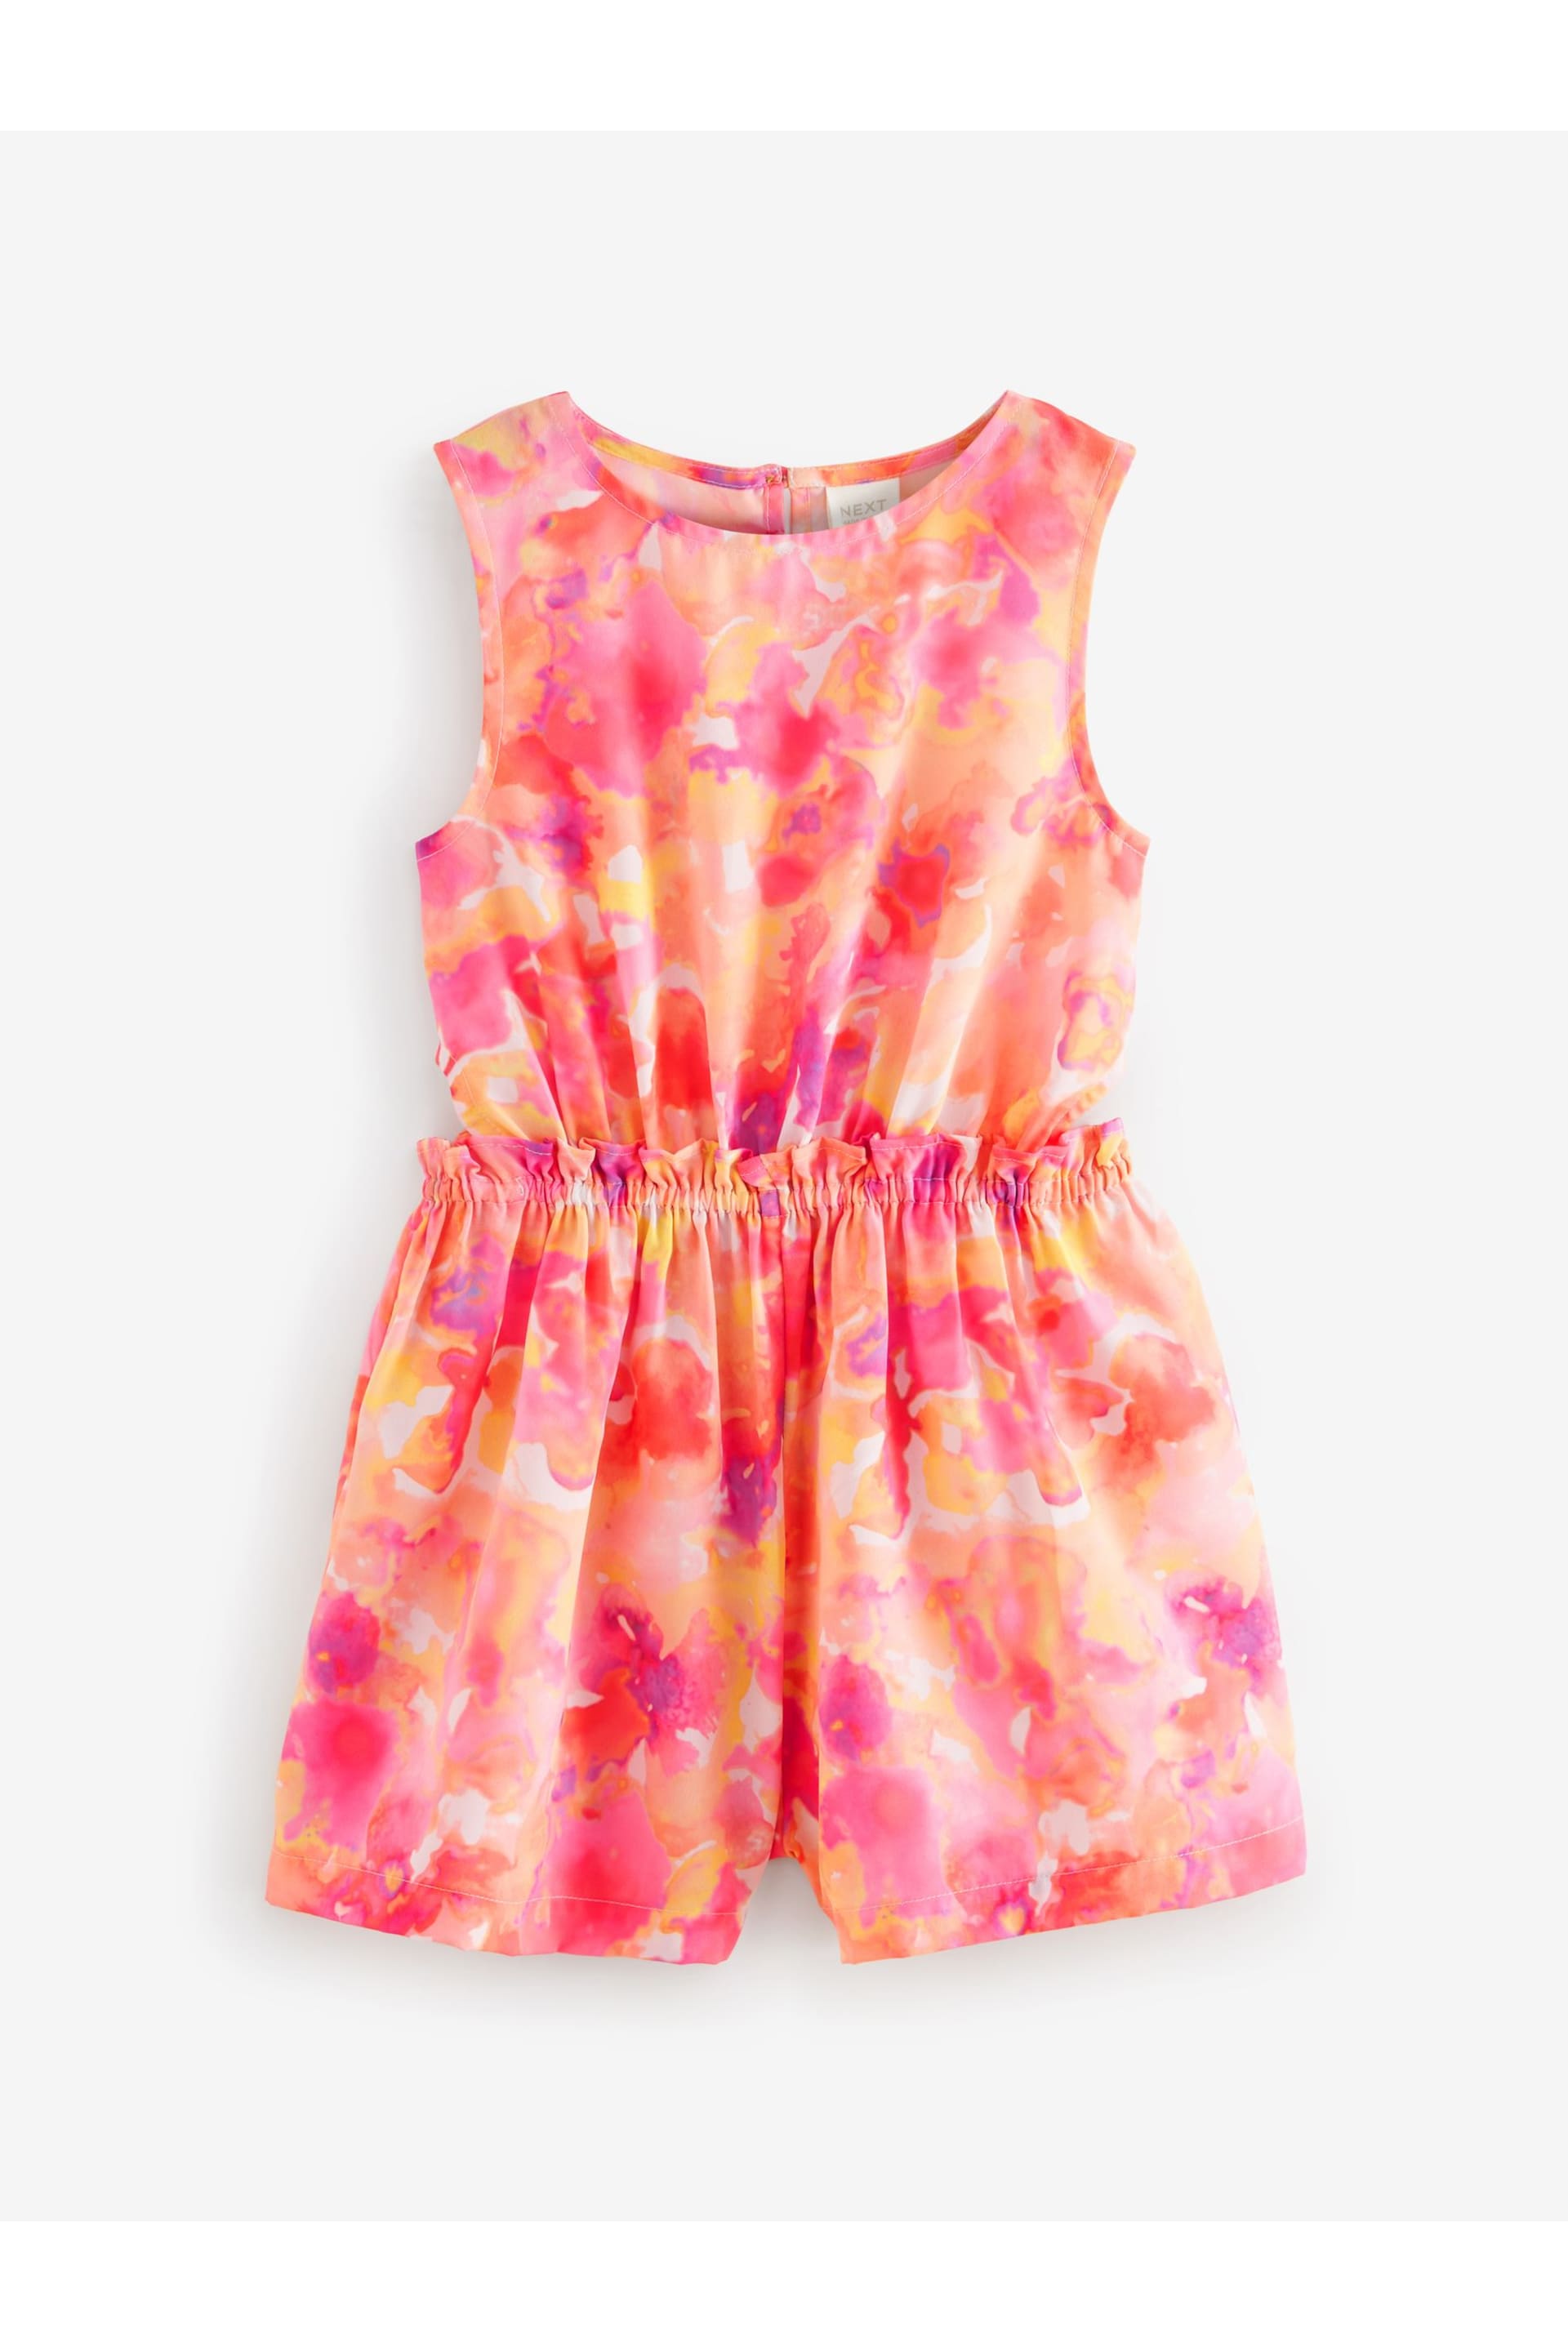 Yellow/Pink Cut-Out Detail Playsuit (3-16yrs) - Image 4 of 7